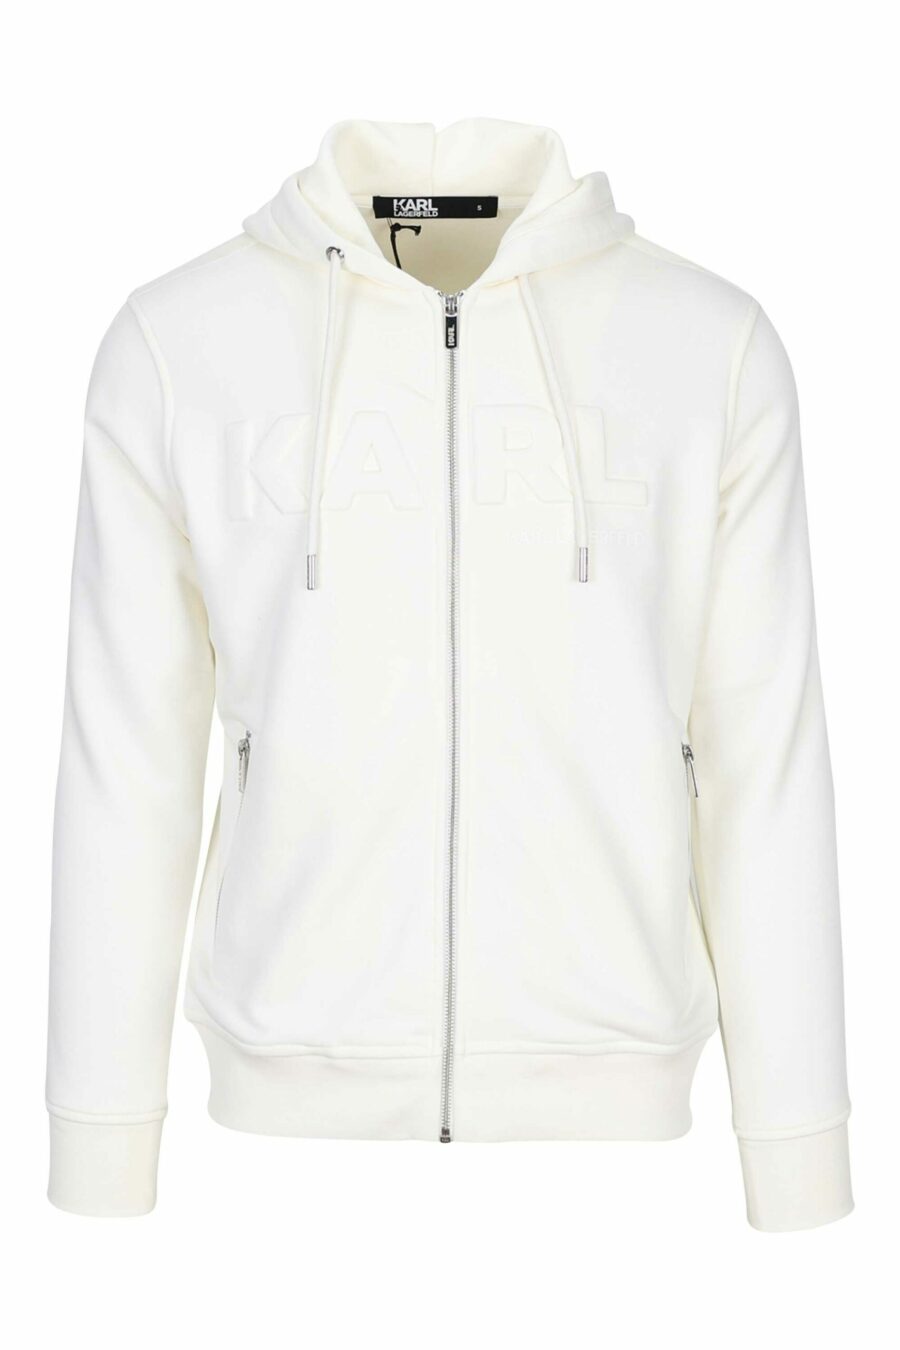 Beige hooded sweatshirt with zip and minilogue - 4062226650304 1 scaled